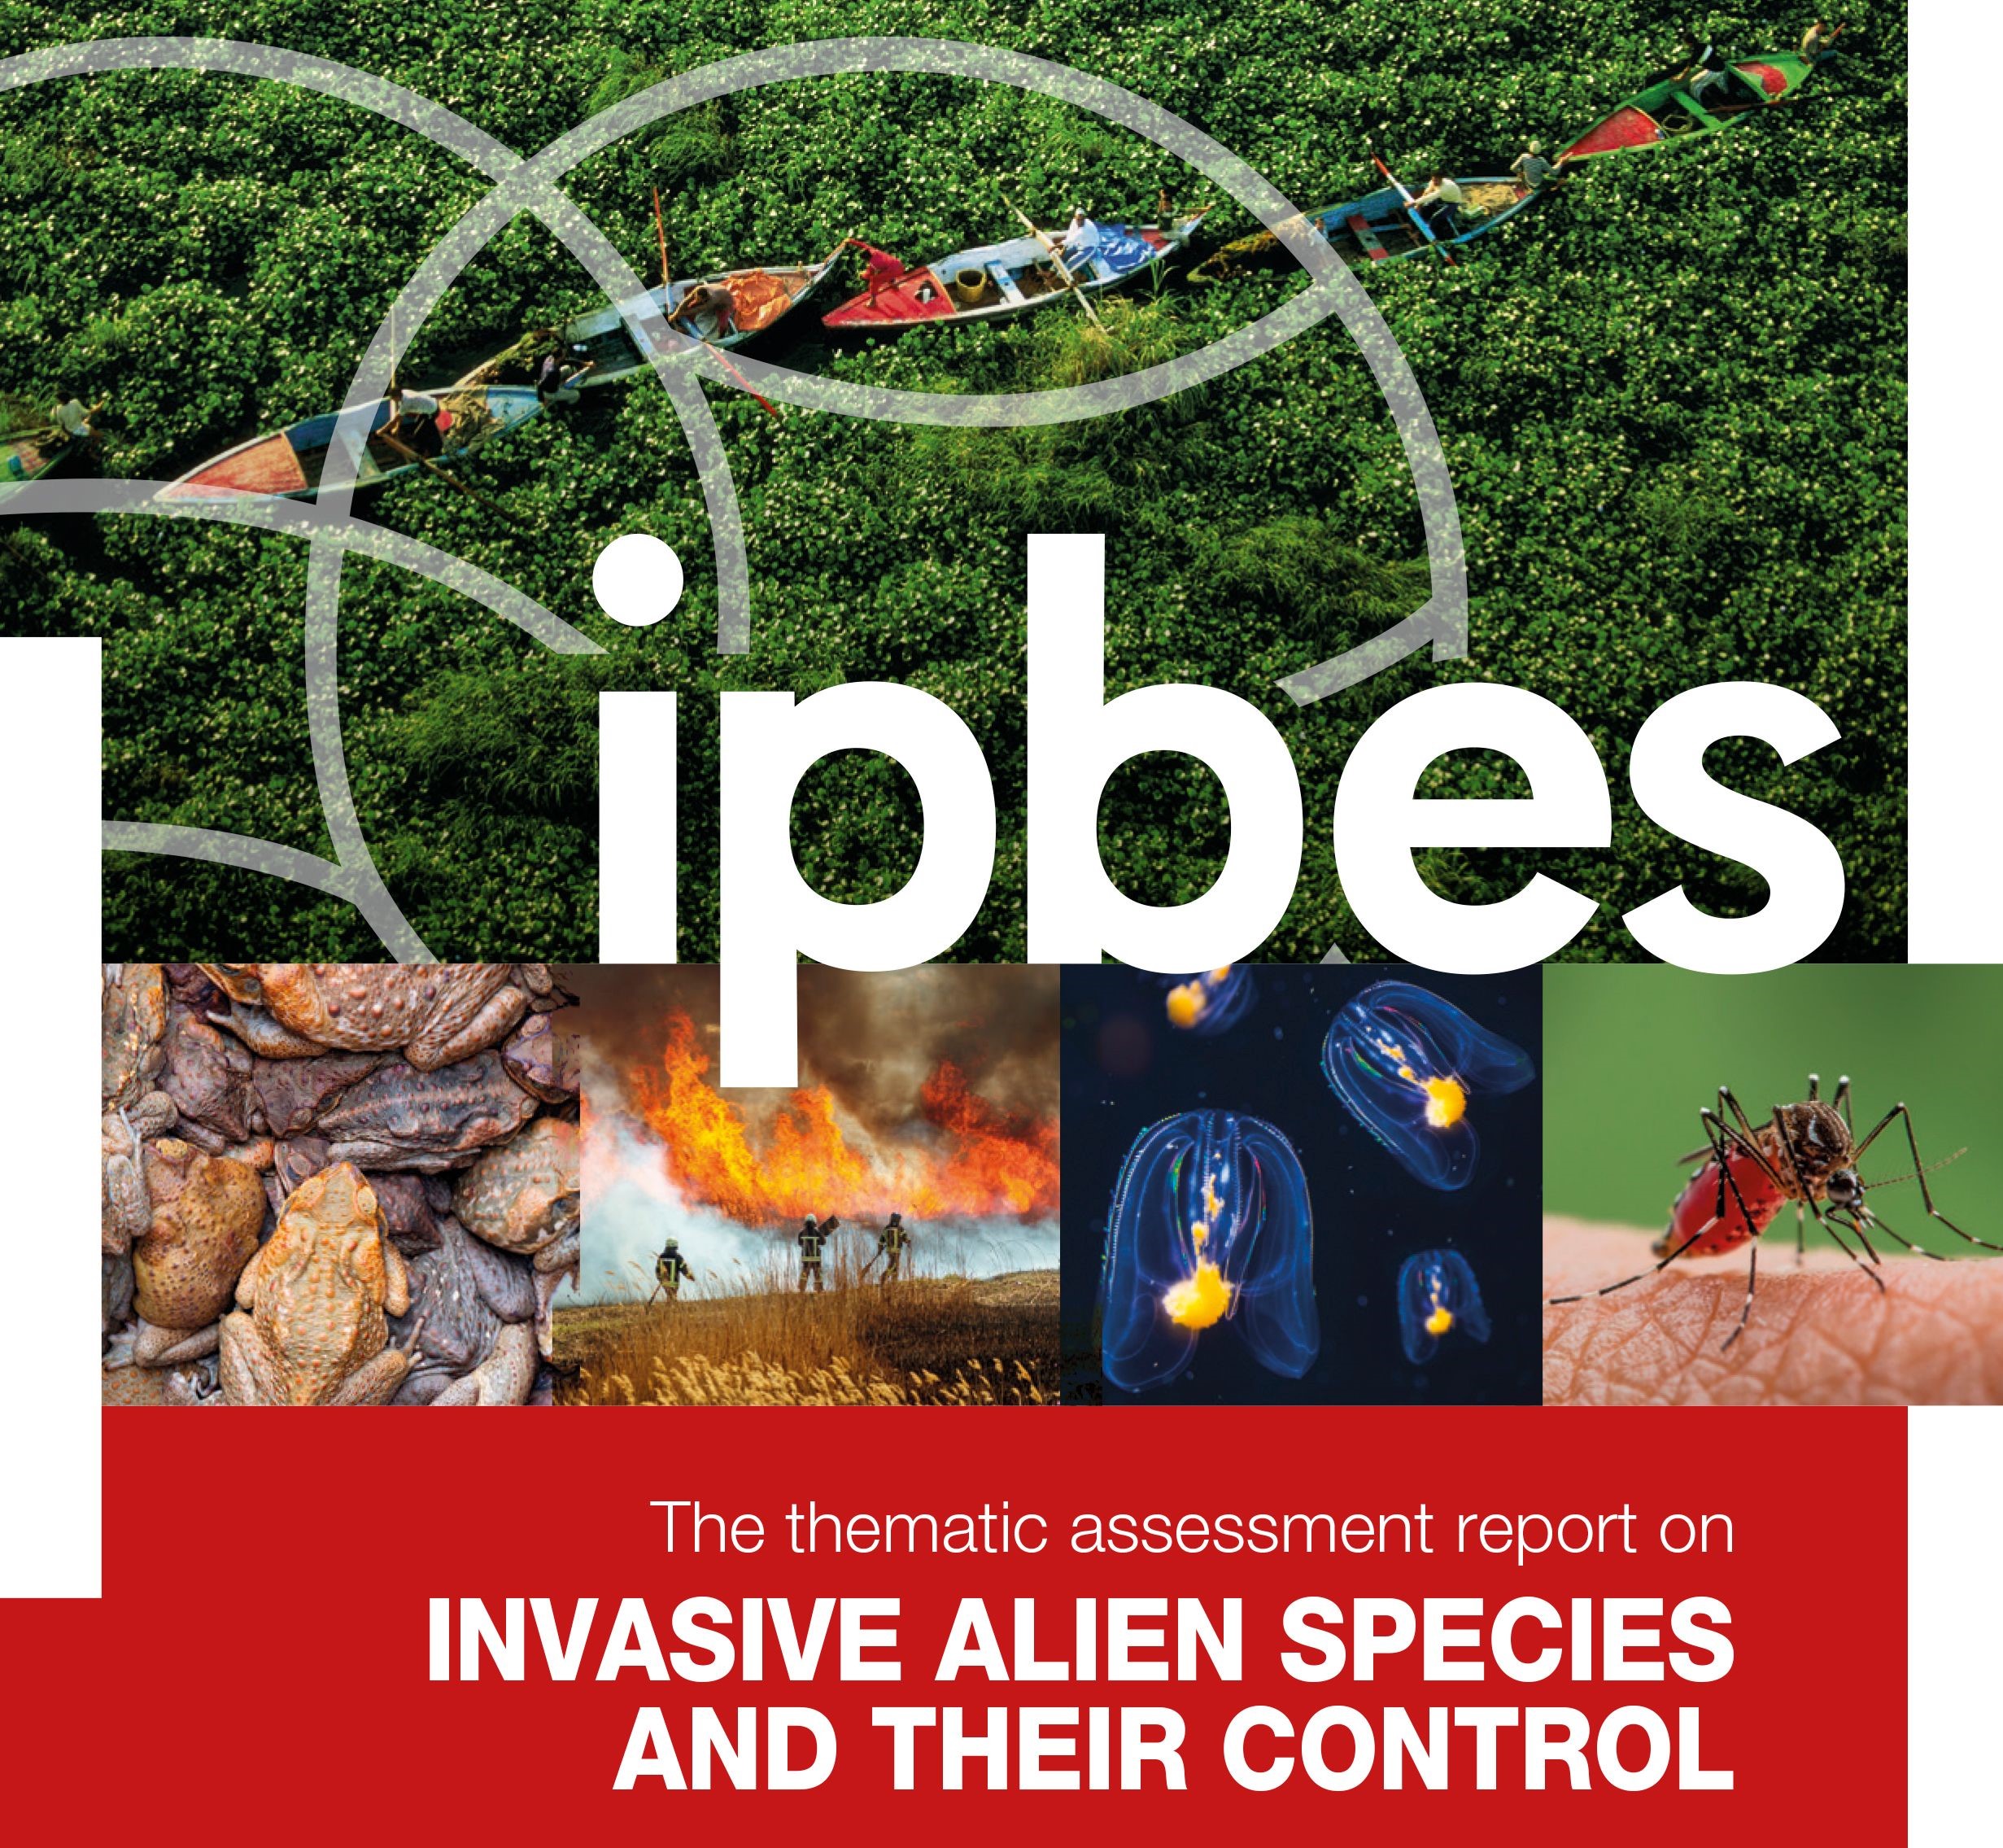 In New Report, IPBES Sounds Alarm on Global Threat of Invasive